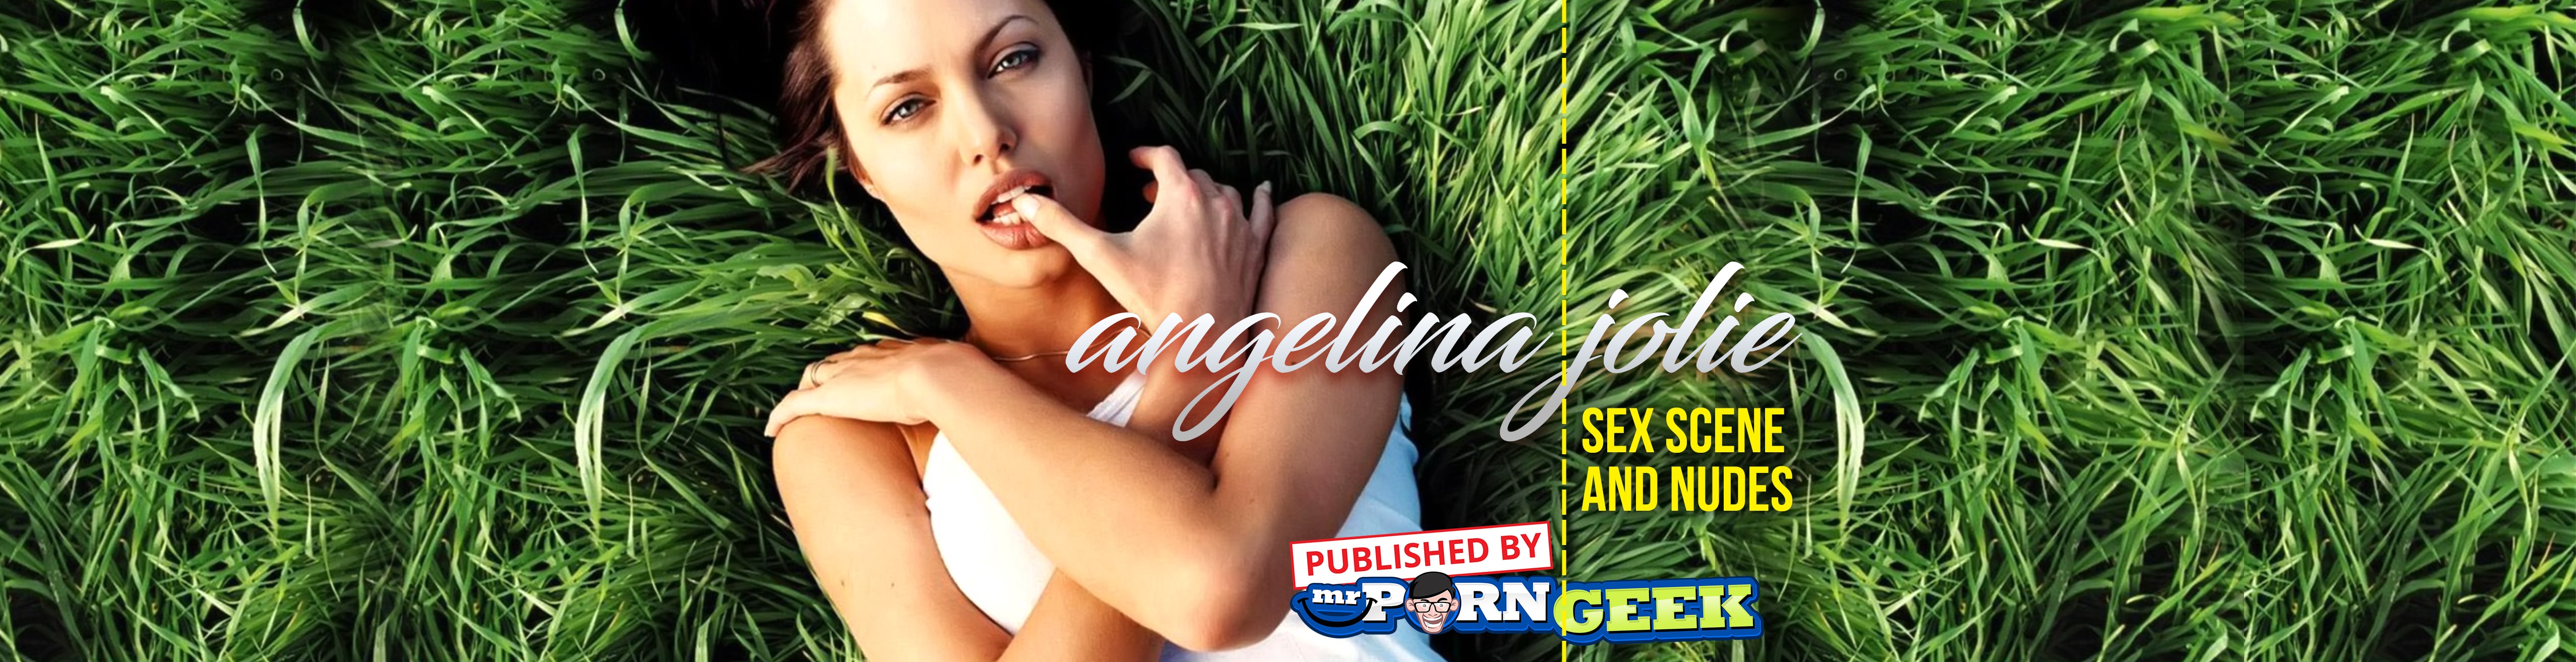 Angelina Sex Scene - Get The Top Angelina Jolie Naked Sex Scene And Nudes At Mr. Porn Geek